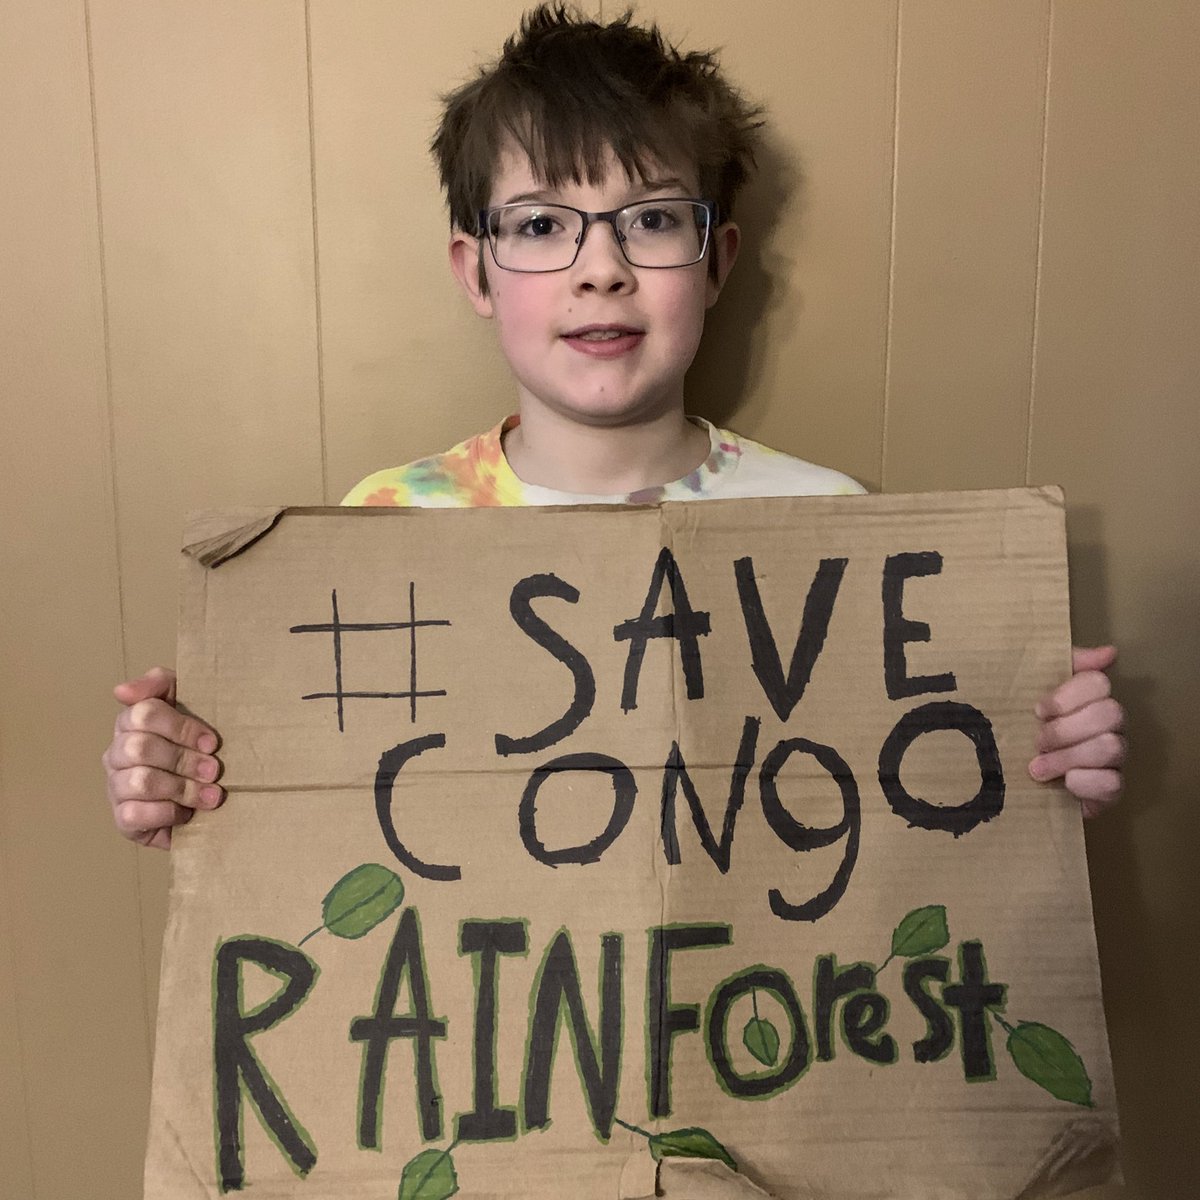 26) Abner,  @Abner4Action, aged 10, is a climate activist from Oregon, USA, who strikes weekly for  #FridaysForFuture and the Congo rainforest. Abner also does digital strikes.